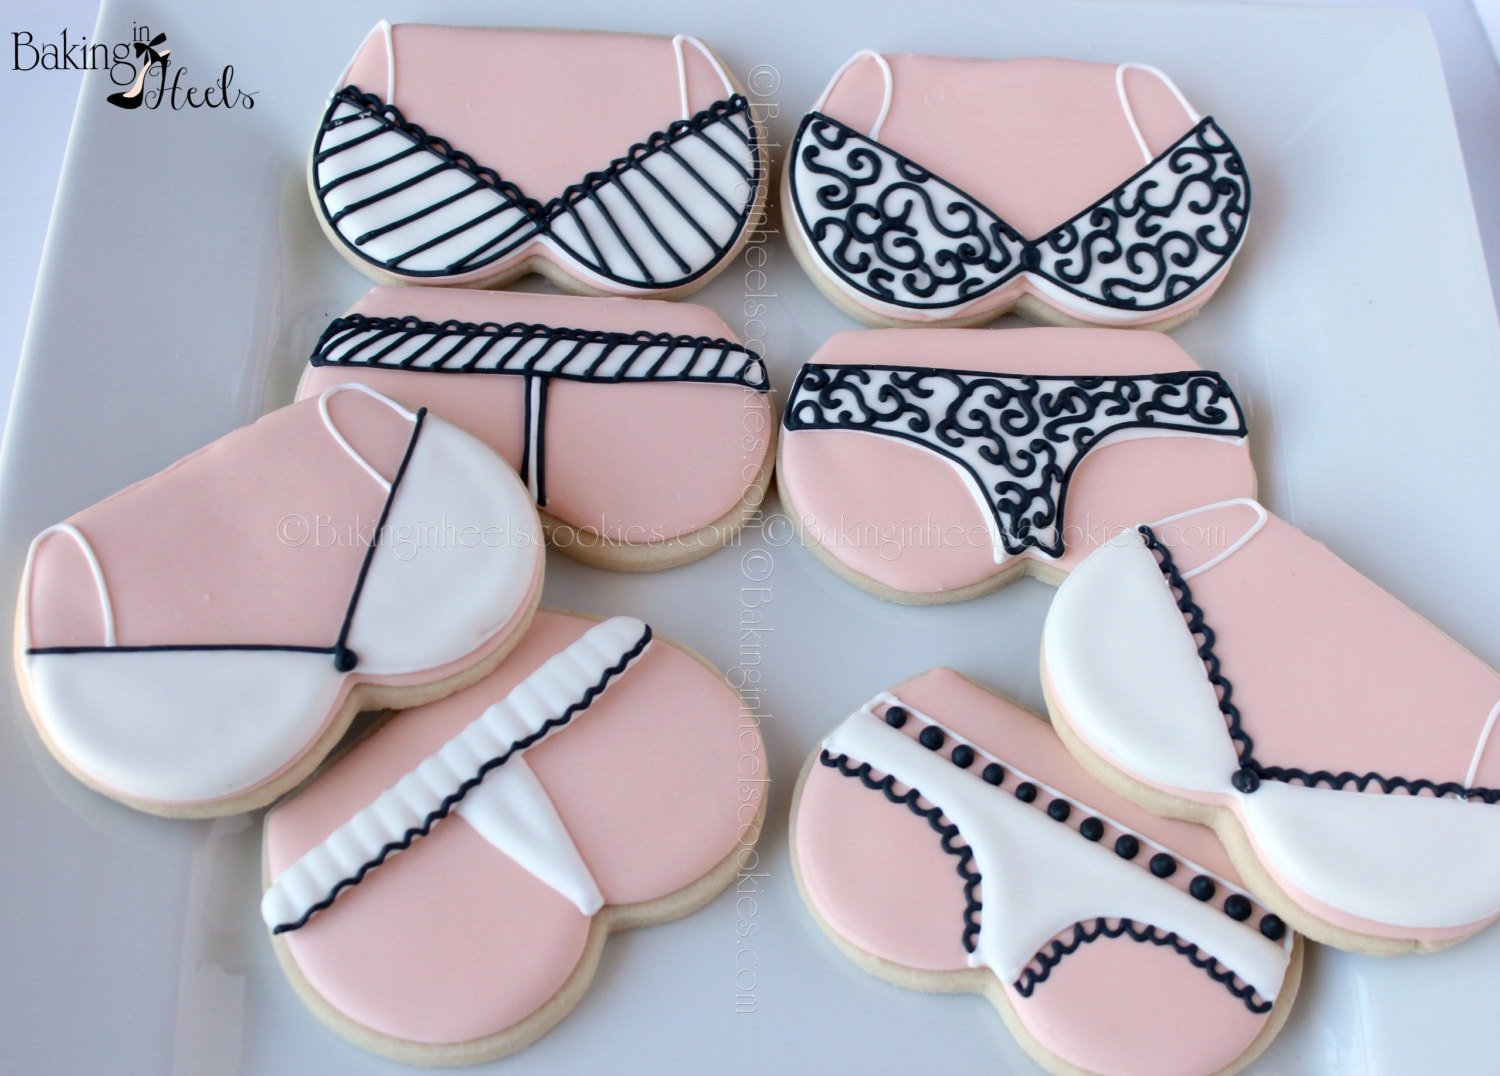 Bra and Panty Decorated cookies, Valentine's cookies, decorated